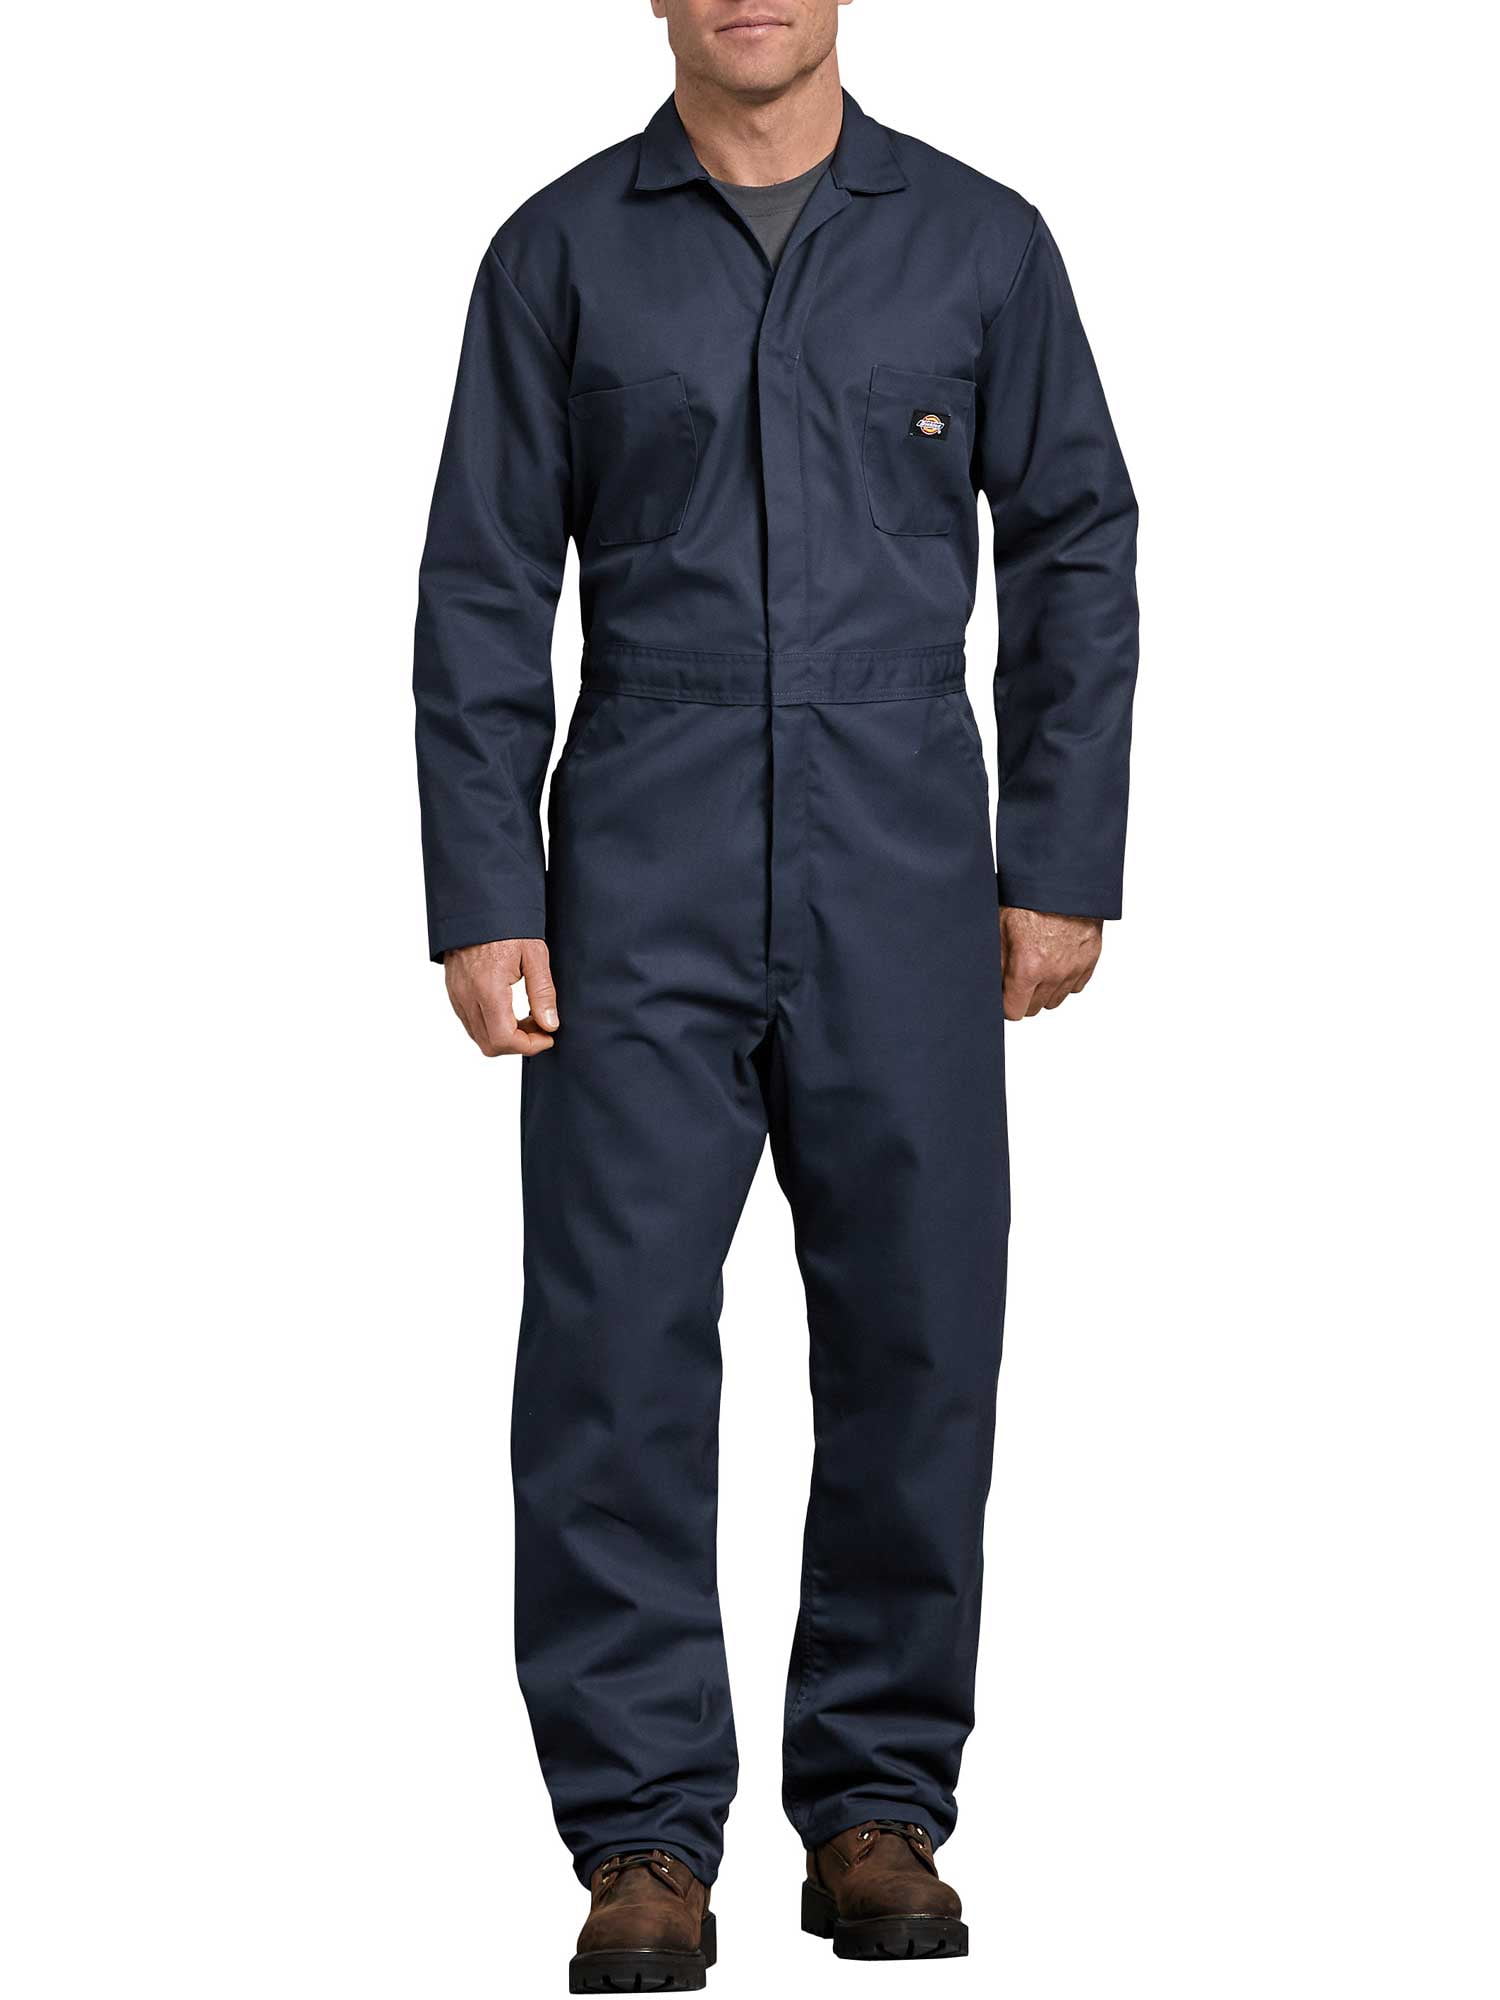 DICKIES Mens 48799 Deluxe Coveralls-Blended  XL TALL  NWT 